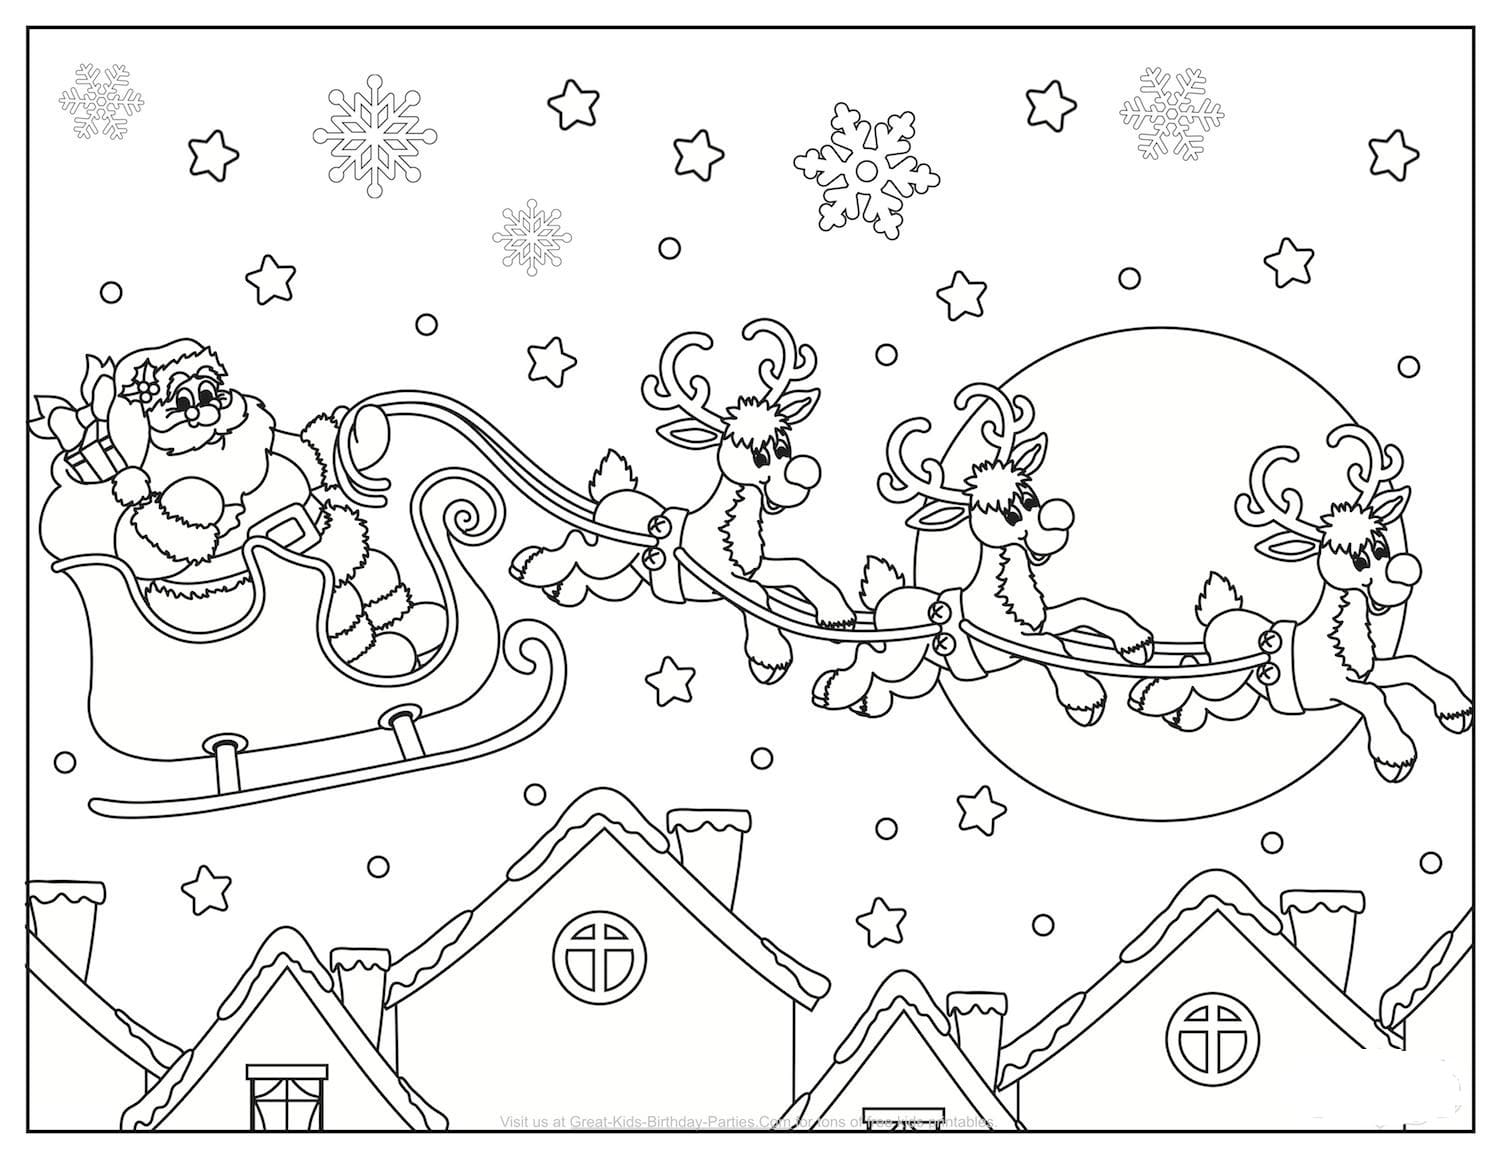 Journey Of Santa Claus Coloring Page